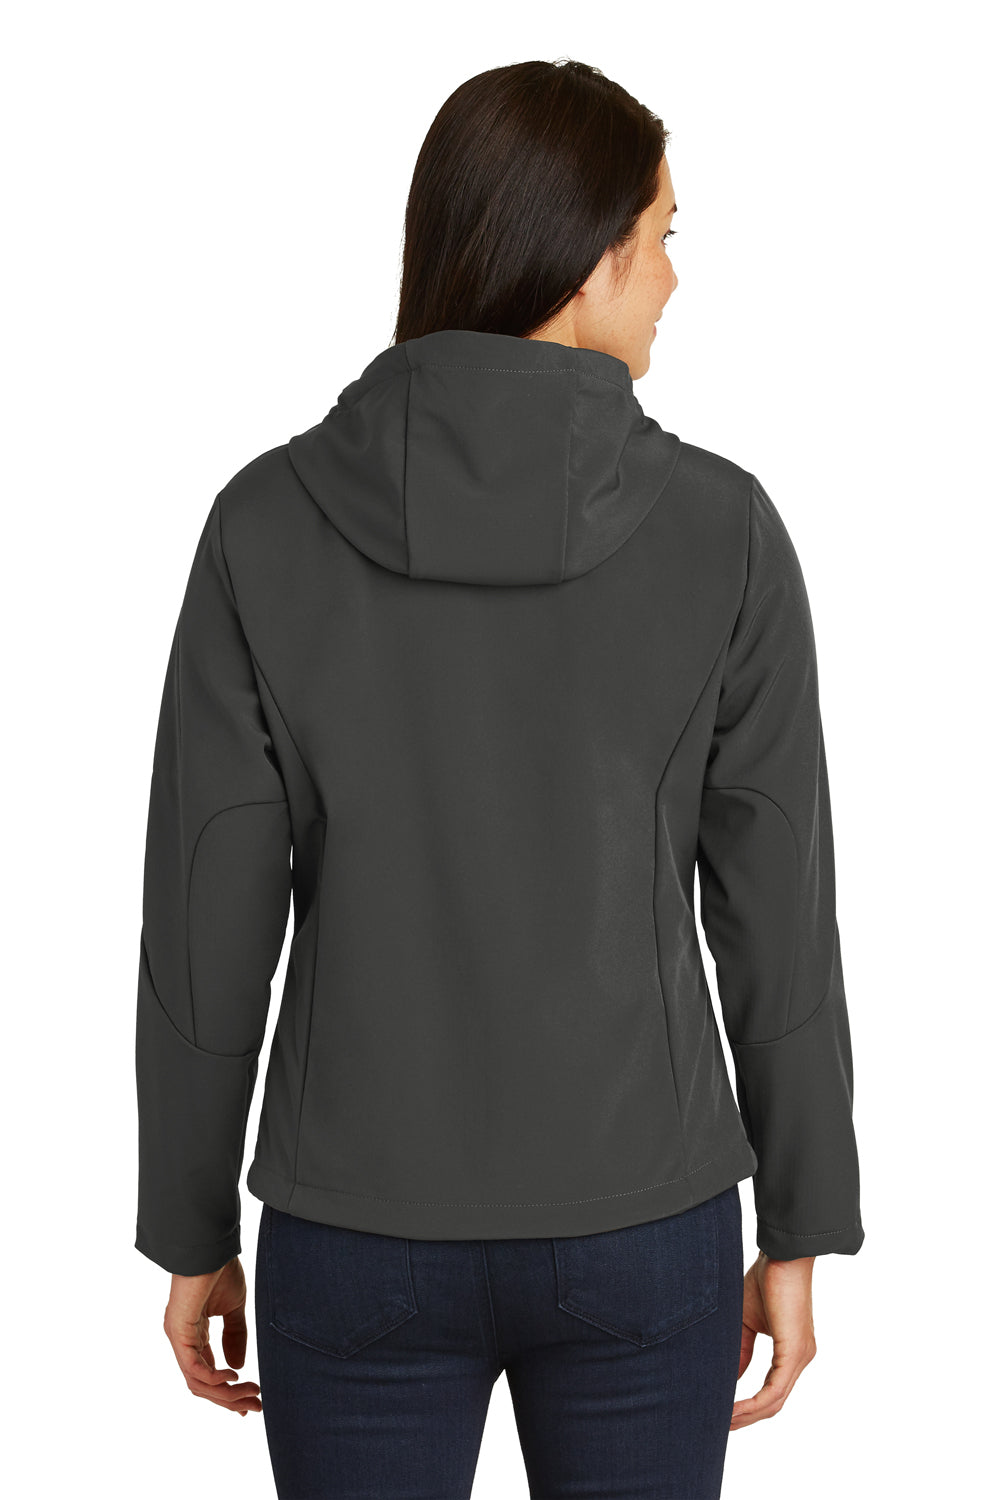 Port Authority L706 Womens Wind & Water Resistant Full Zip Hooded Jacket Charcoal Grey Back